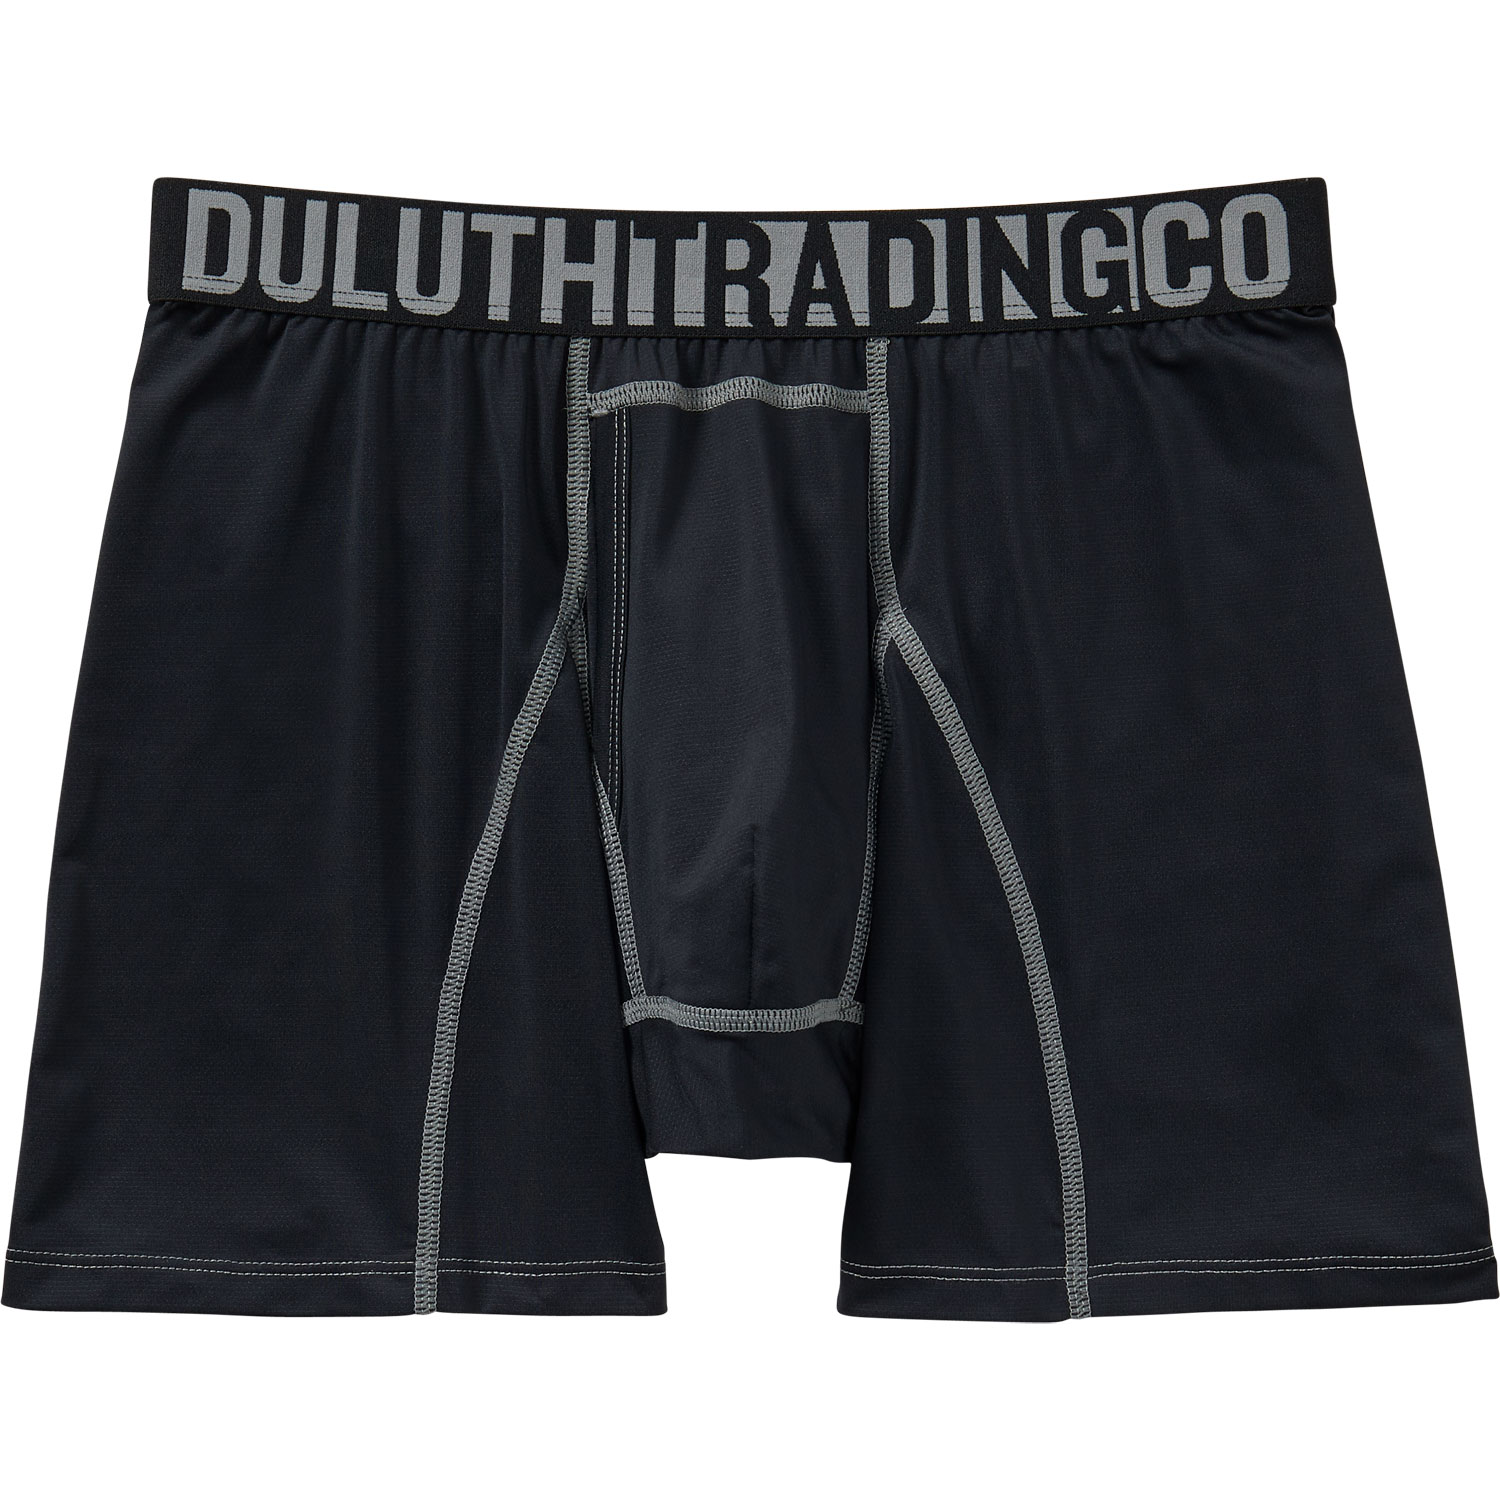 Duluth Trading Armachillo Boxer Brief Mens Size Large (36-38) Jelly Fish  Pattern